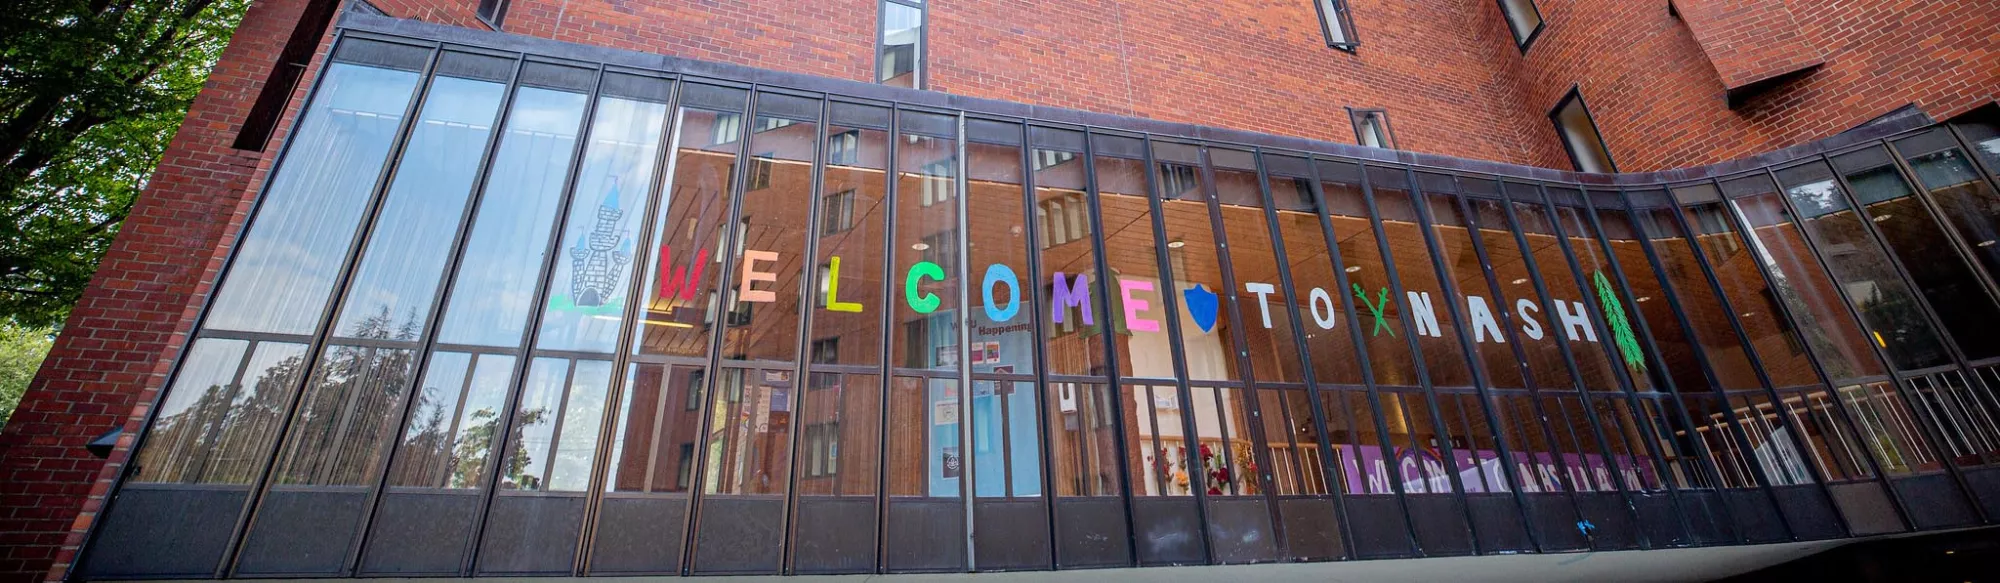 Hand lettered "Welcome to Nash" sign inside the windows of Nash Hall